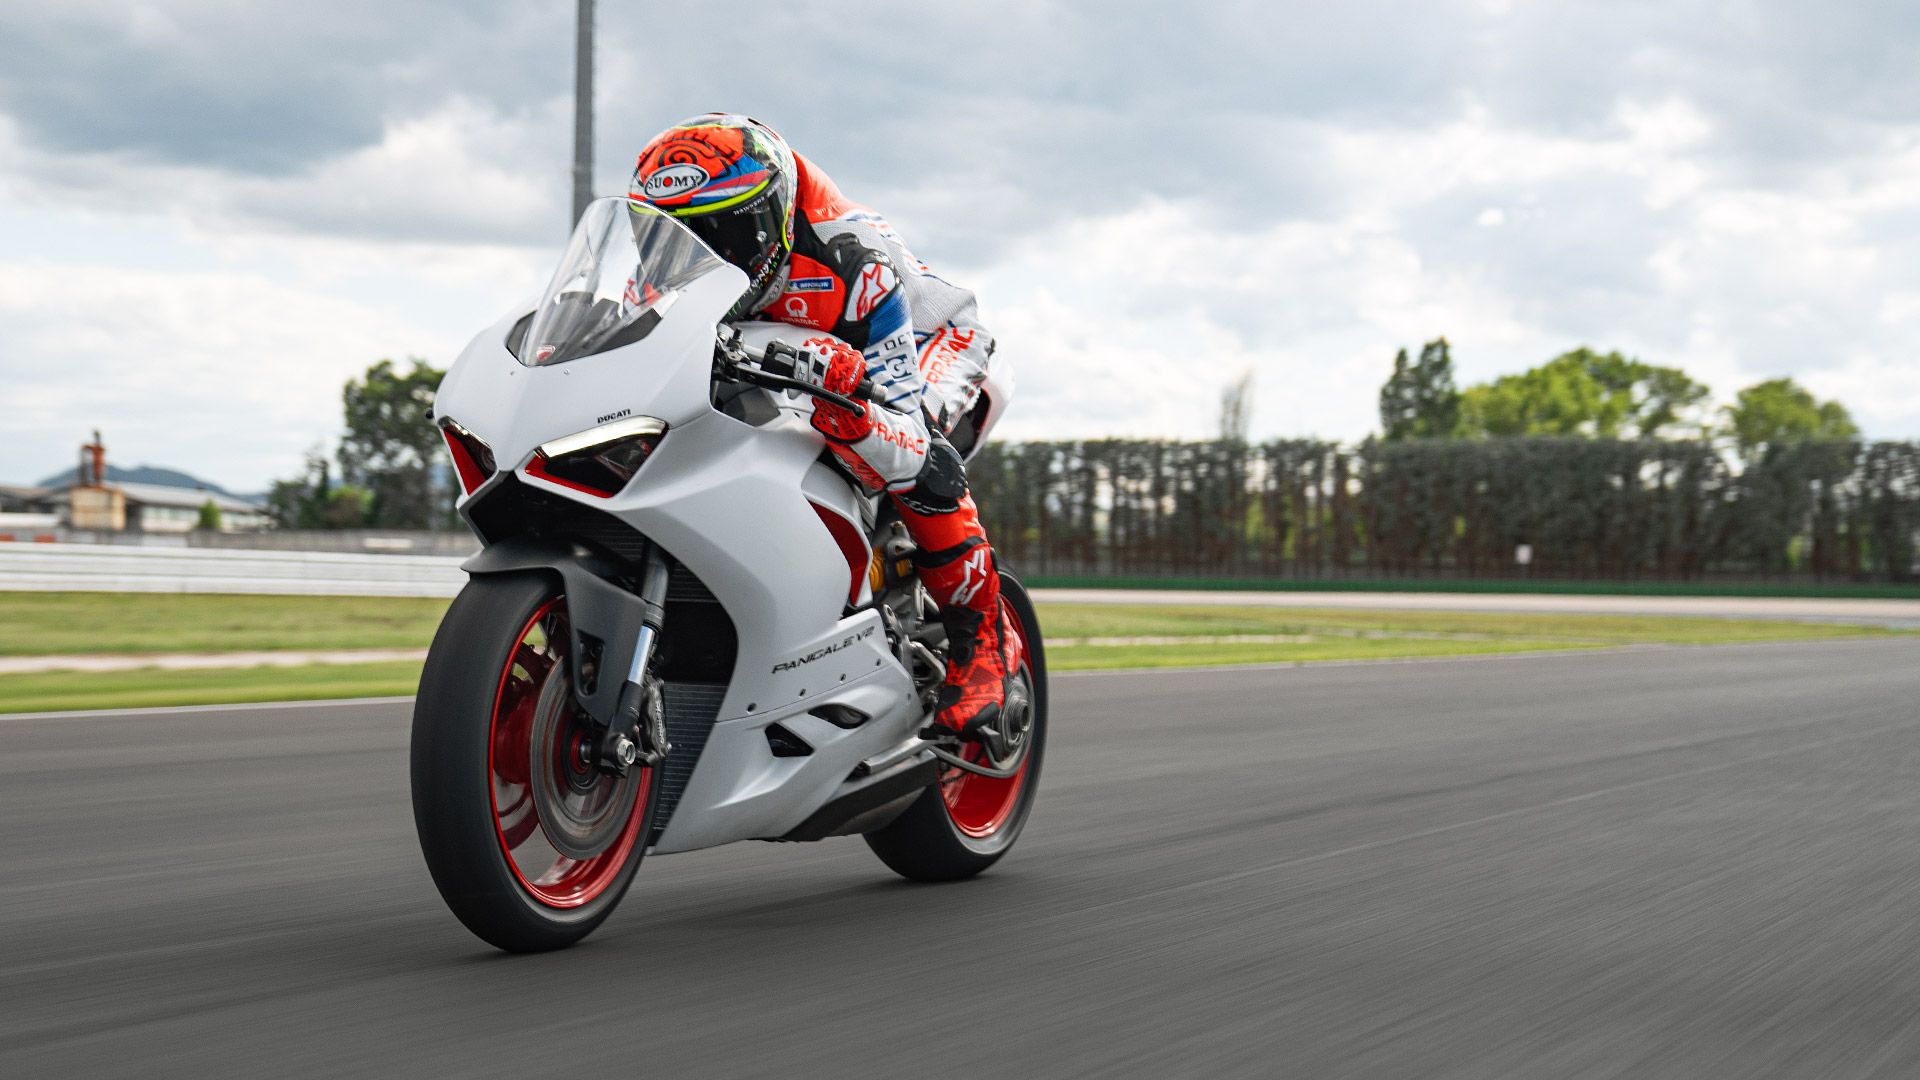 Ducati Panigale V2: High Performance, Red Essence